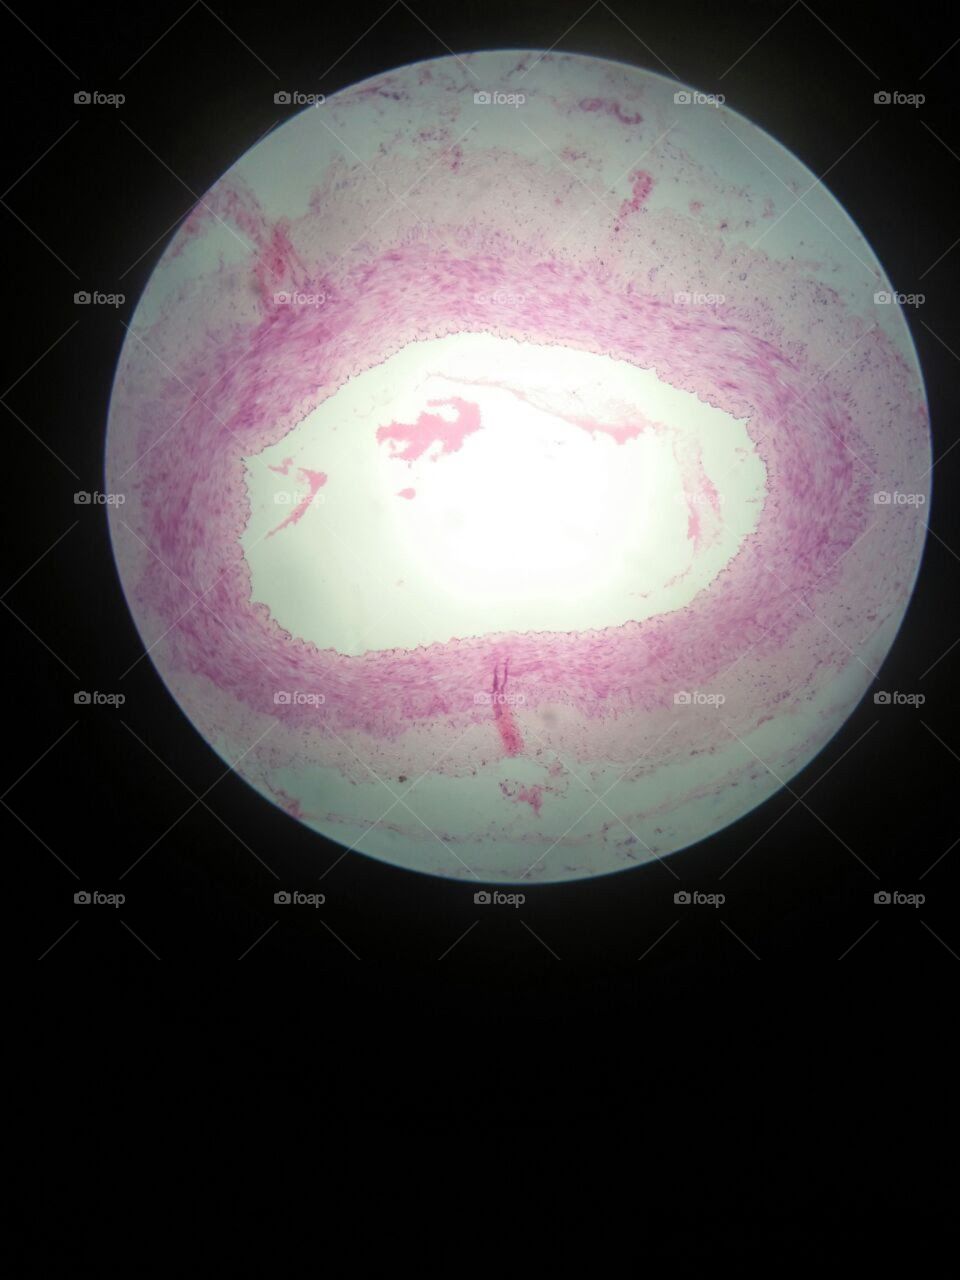 Histology of human tissue, show epithelium cell, connective tissue and muscle tissue with microscope view